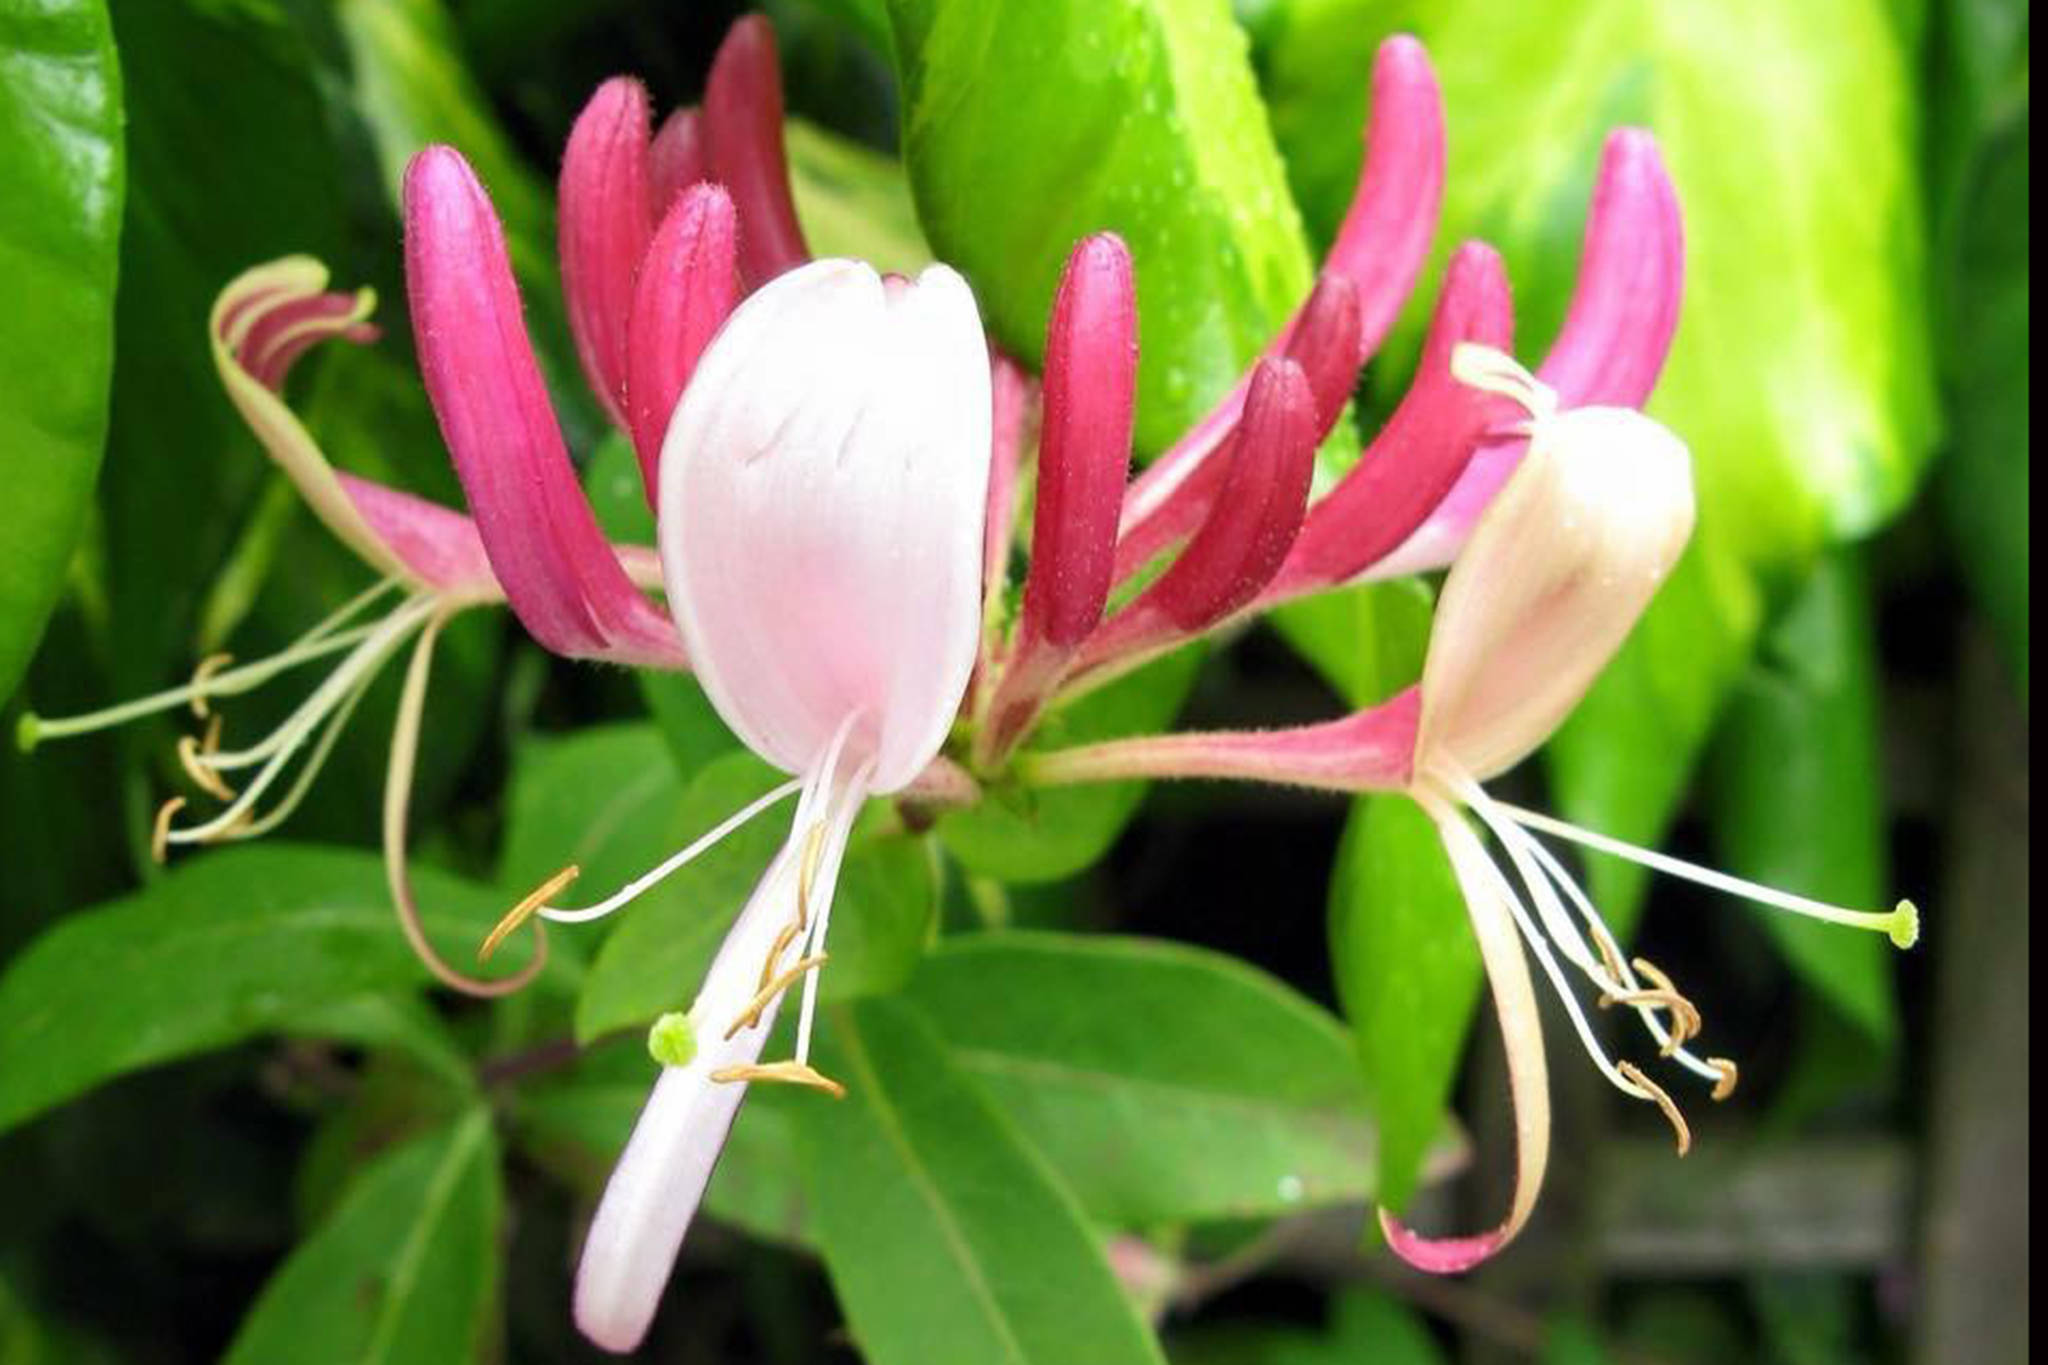 Honeysuckle can be used to make syrup, but be careful, some stems can be poisonous. (Vivian Mork Yéilk’ | For the Capital City Weekly)